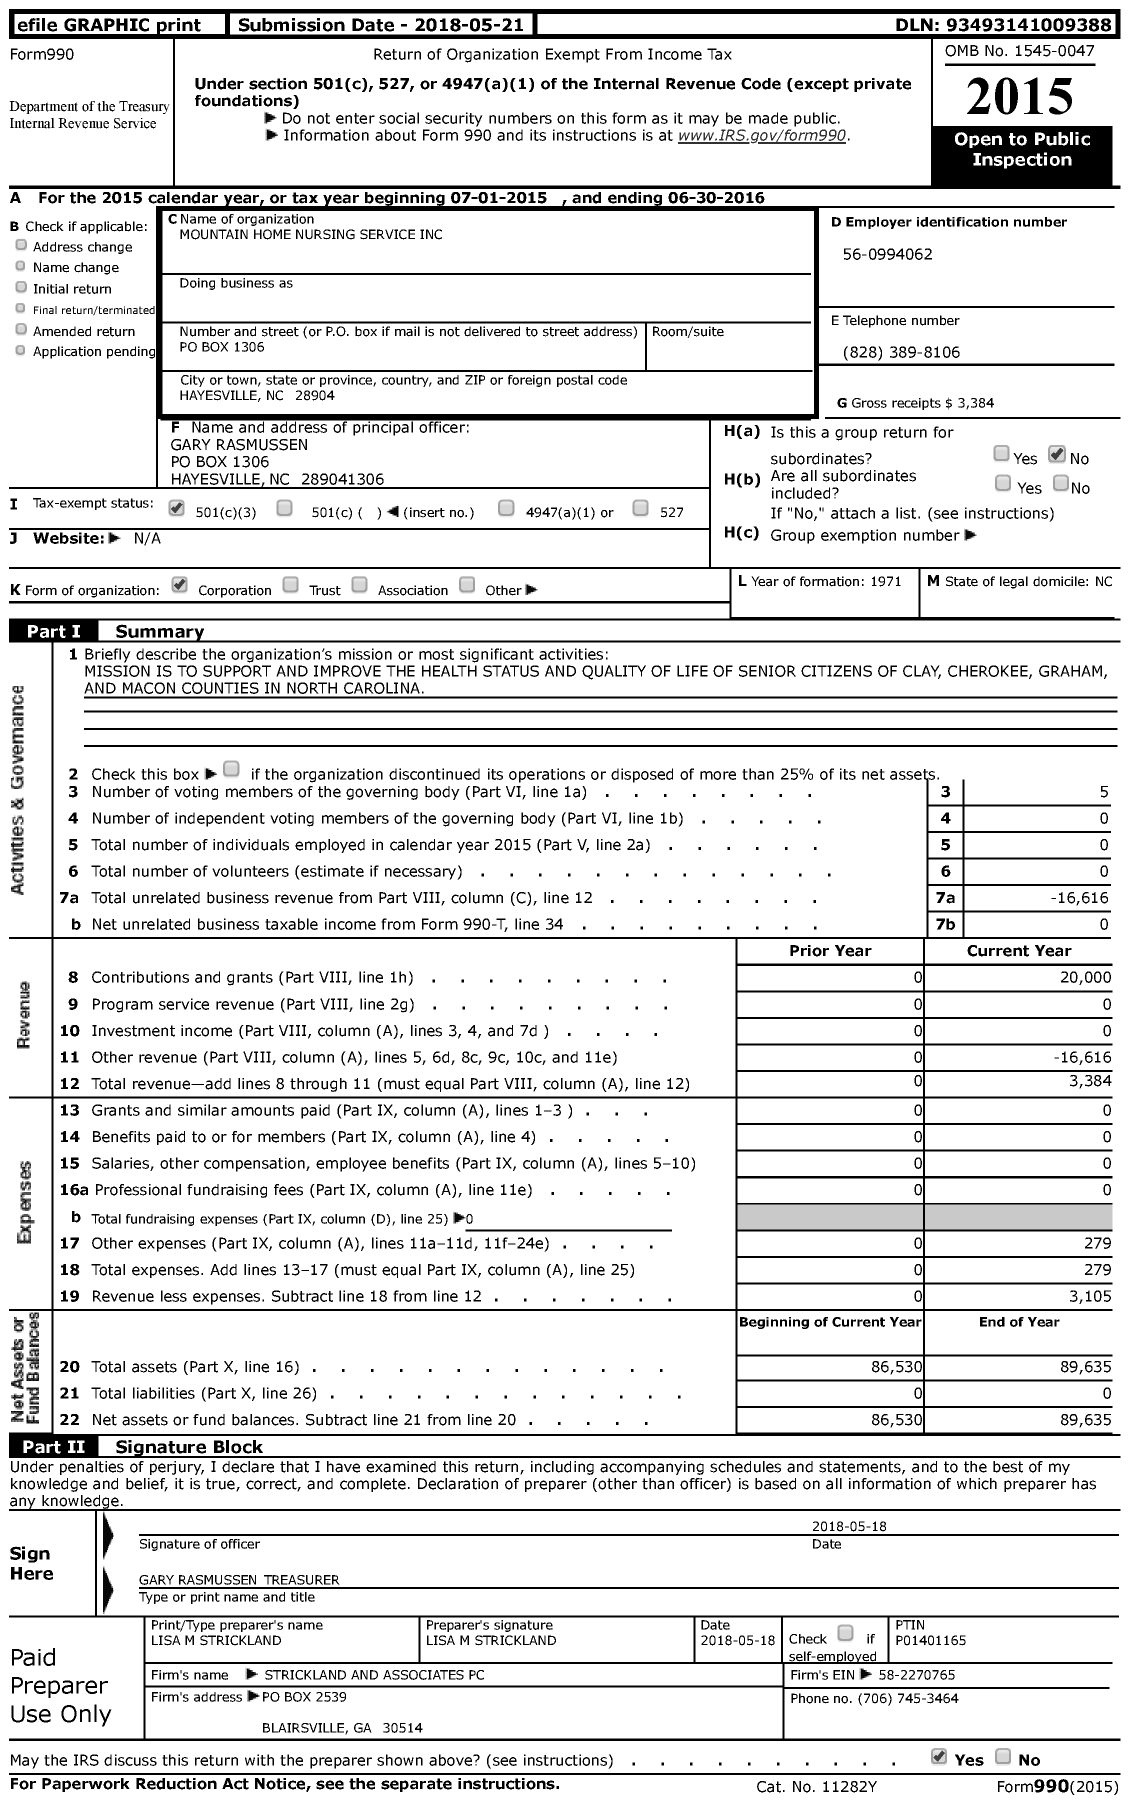 Image of first page of 2015 Form 990 for Mountain Home Nursing Service